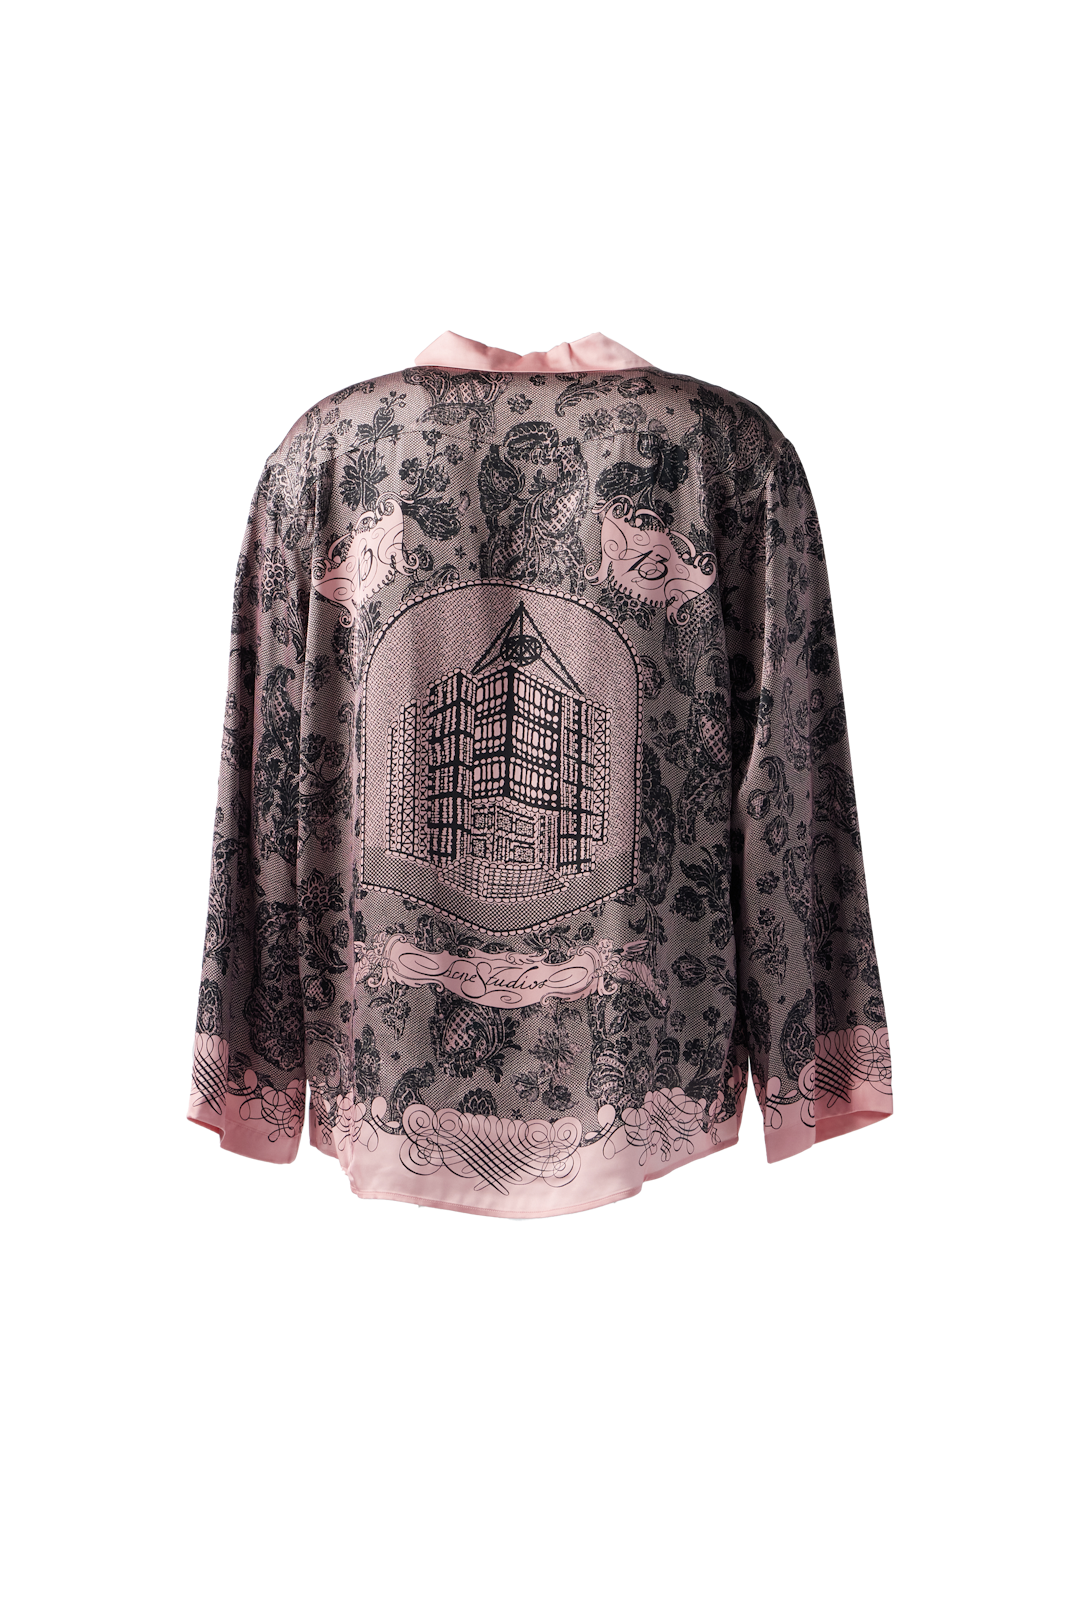 ACNE STUDIOS - All Over Print Top product image